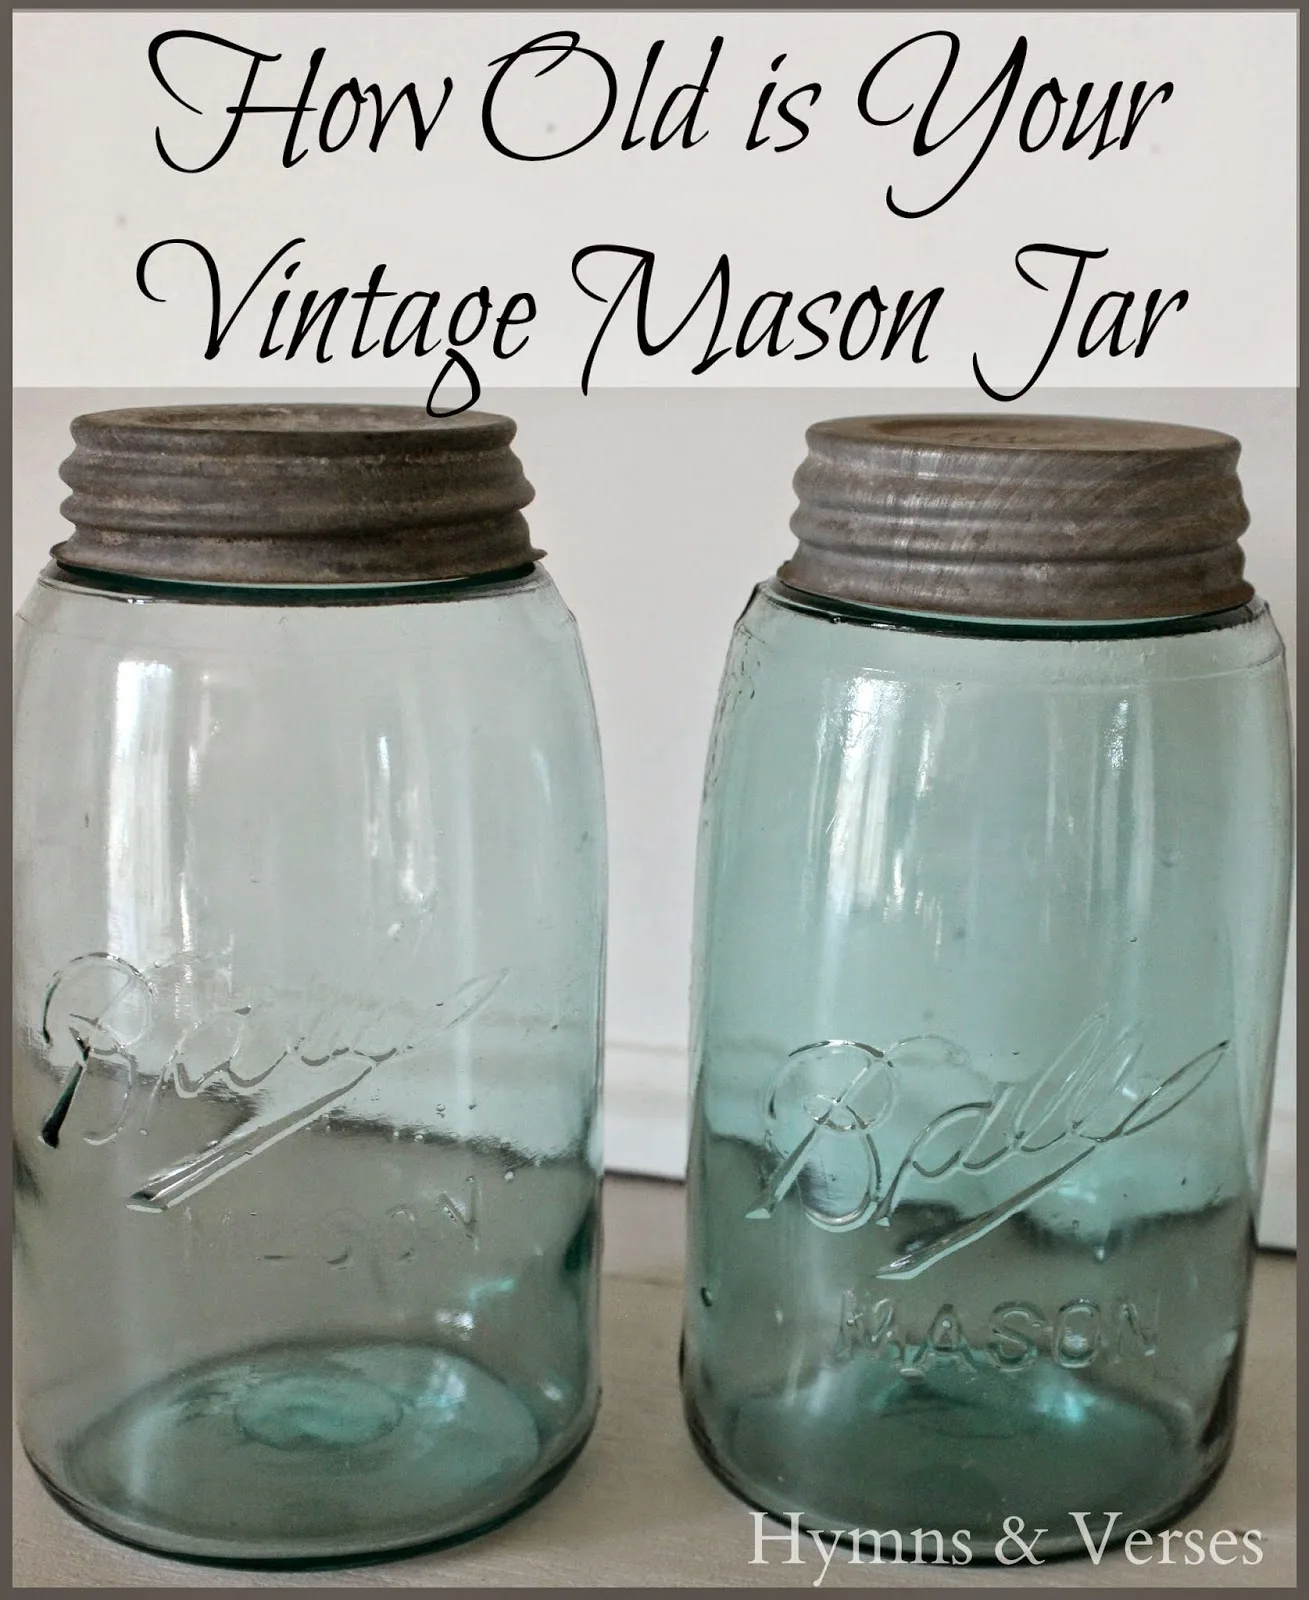 How Old is Your Vintage Mason Jar